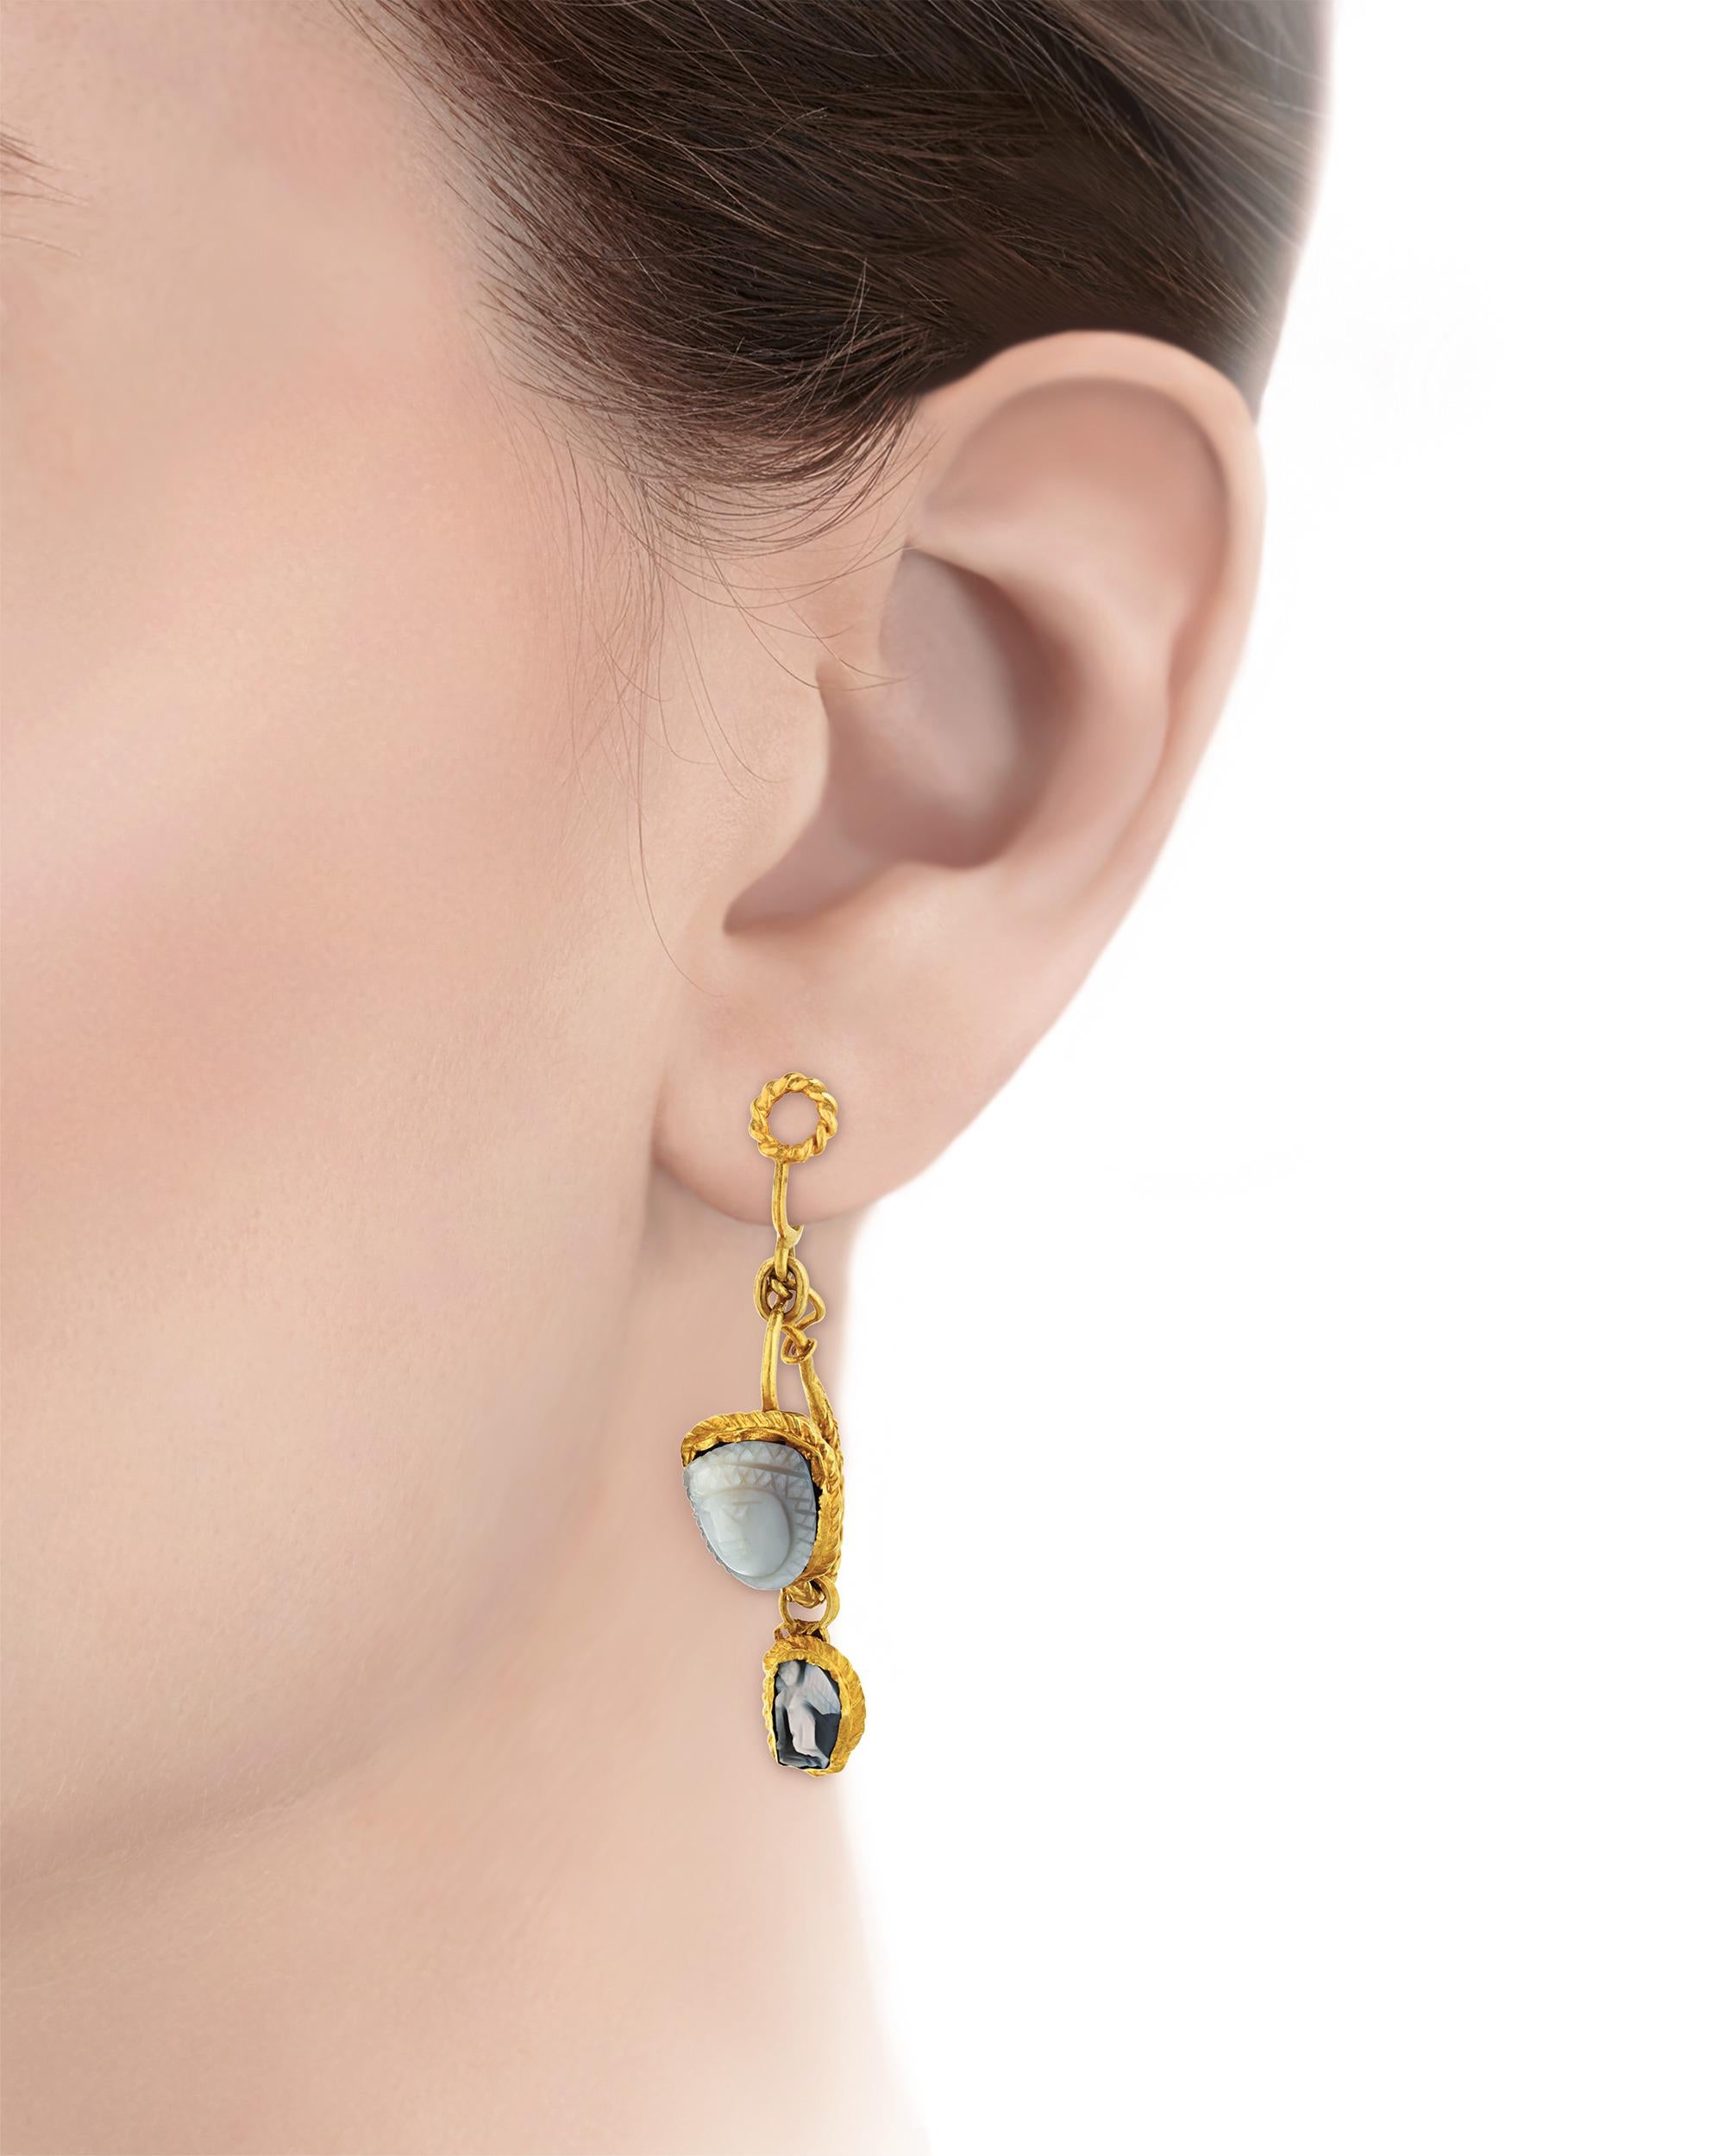 Displaying two carved Medusa gemstones over 1800 years old, these dangle earrings are exceptional examples of the ancient Roman intaglio technique. Paired with a 19th-century gold setting and accented by two additional Victorian cameos, these